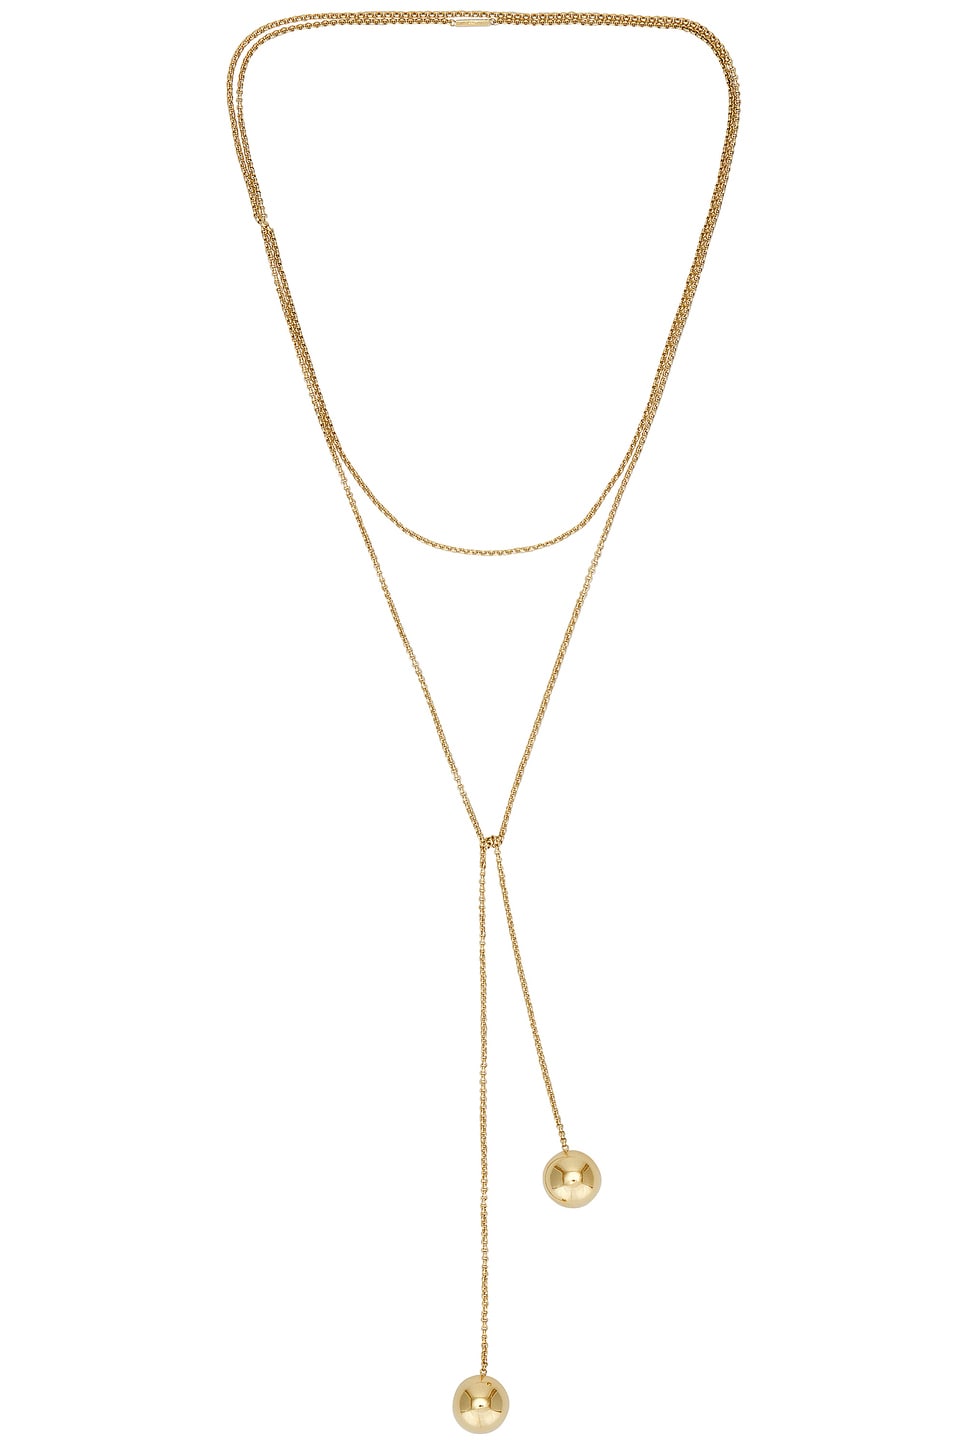 Image 1 of Lie Studio The Astrid Necklace in 18k Gold Plated